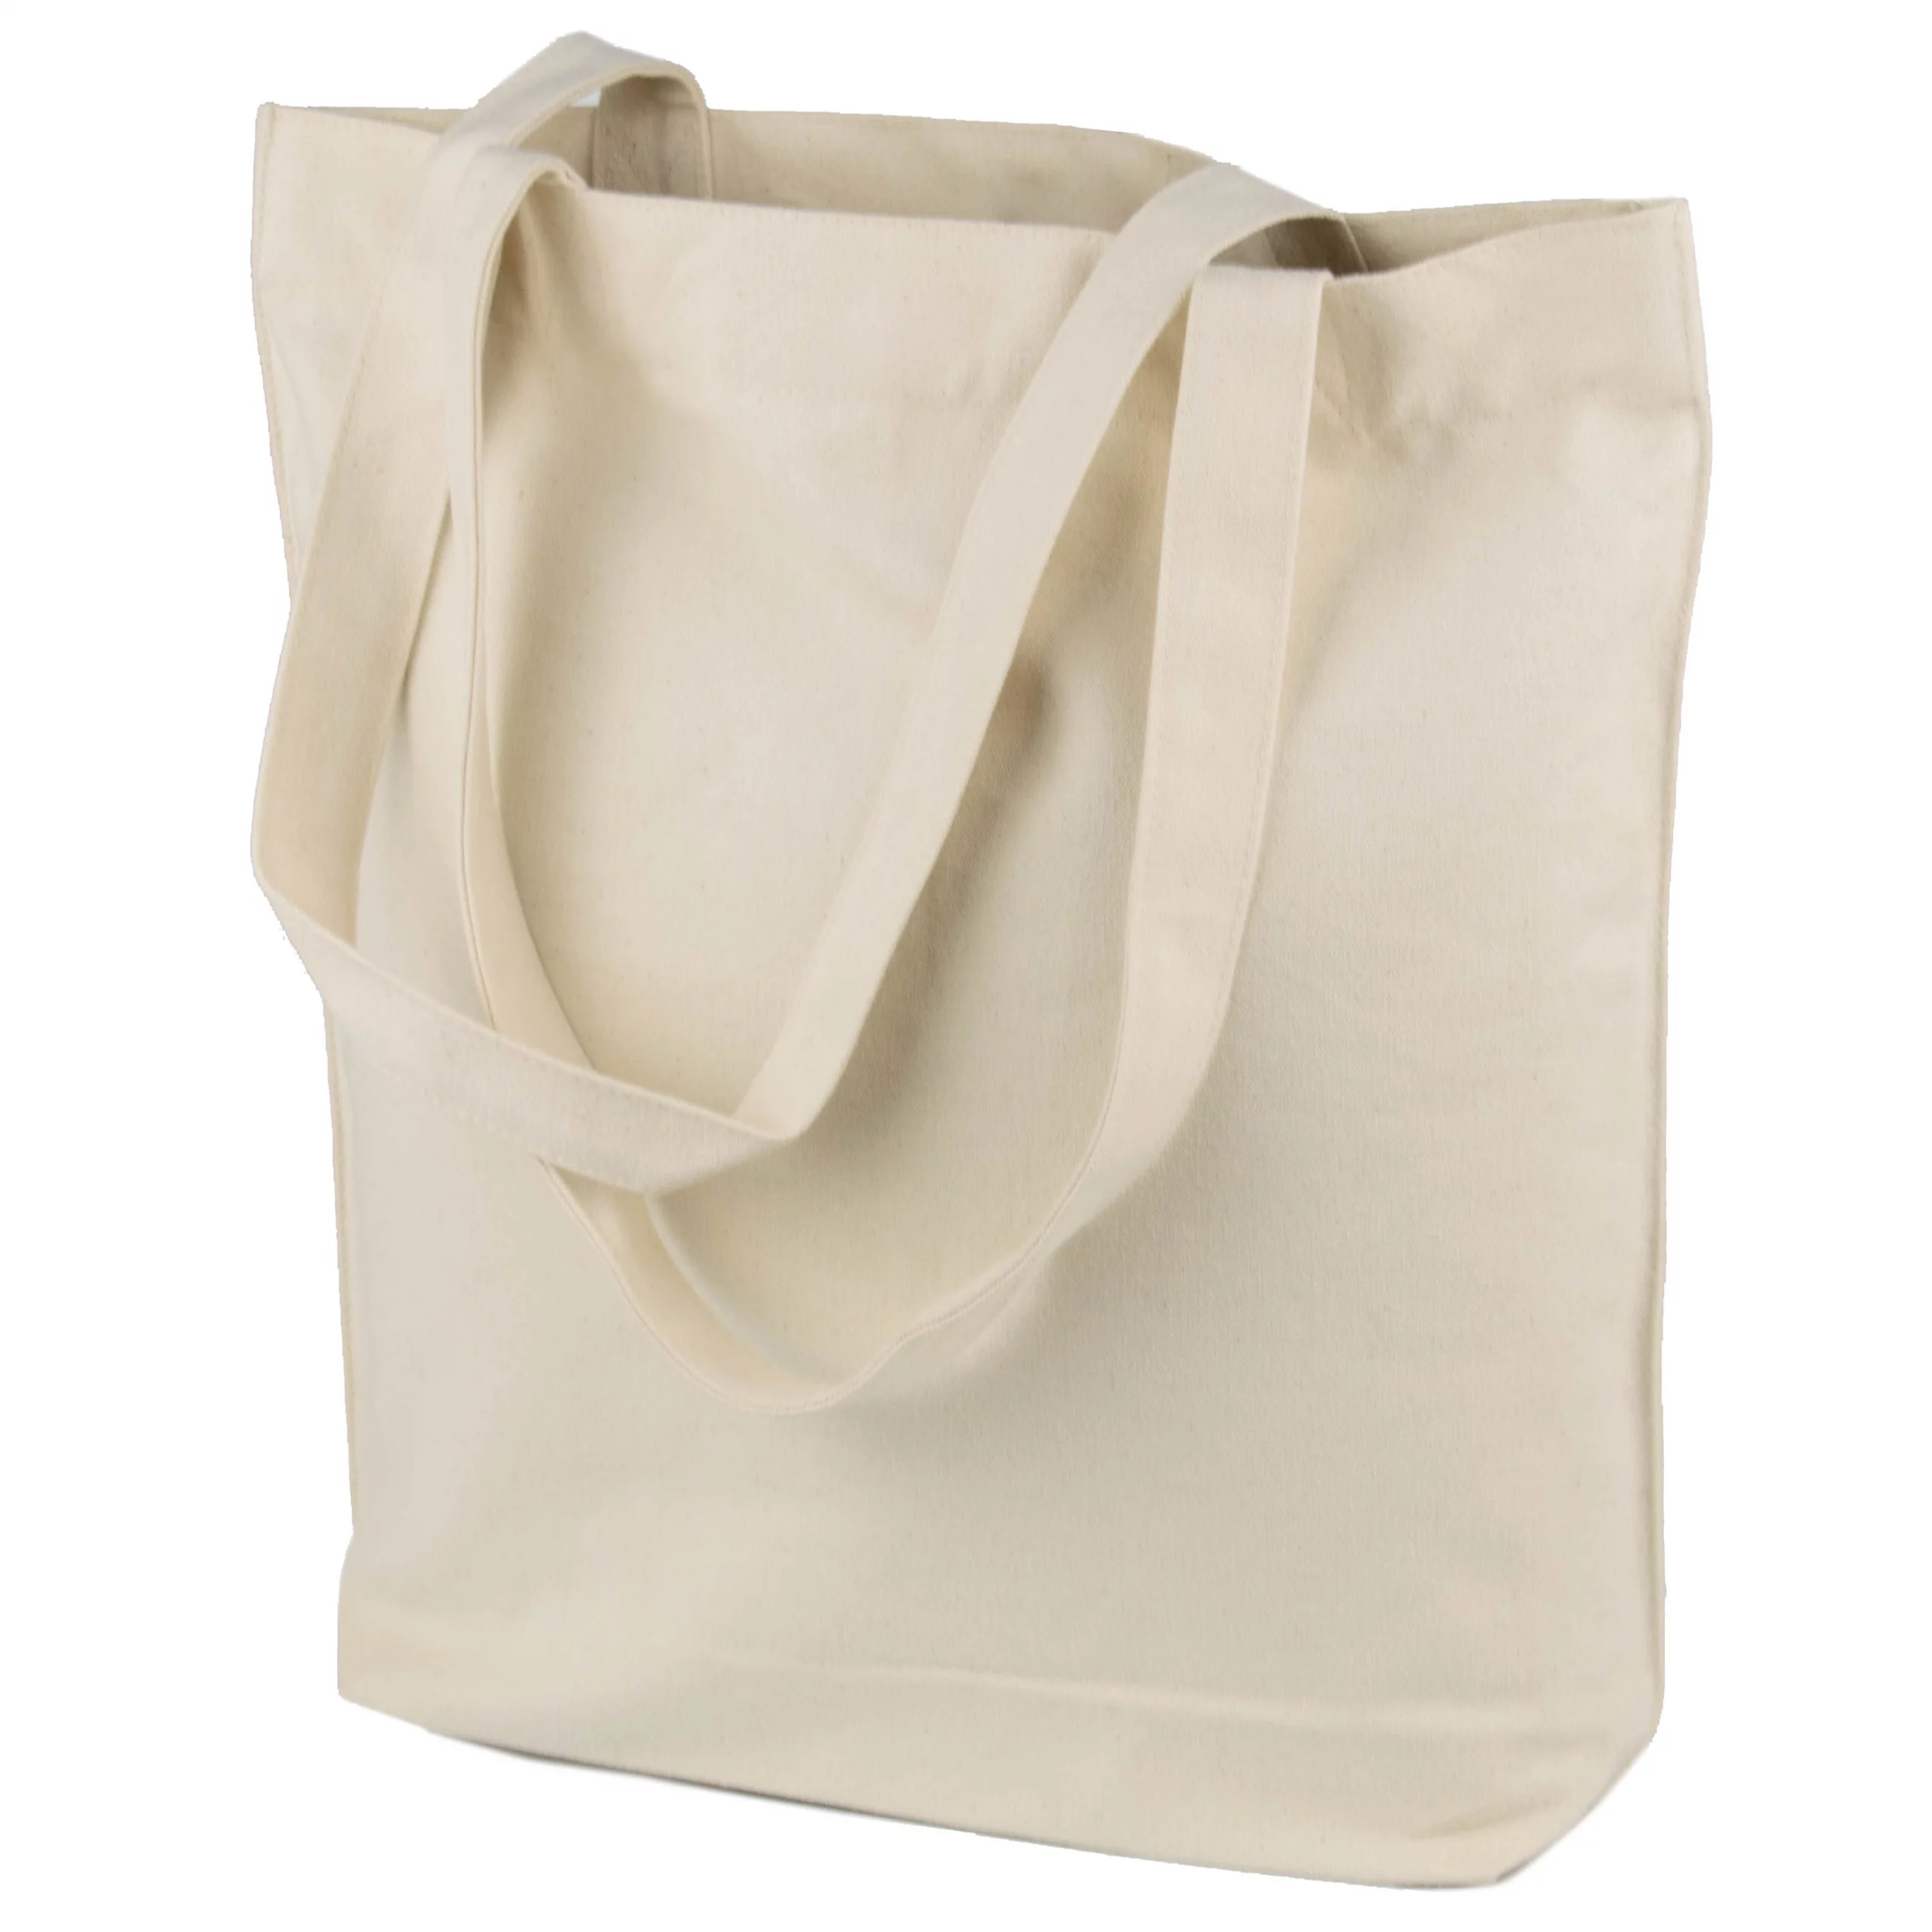 Best Fabric Options for Cotton Cloth Tote Bags